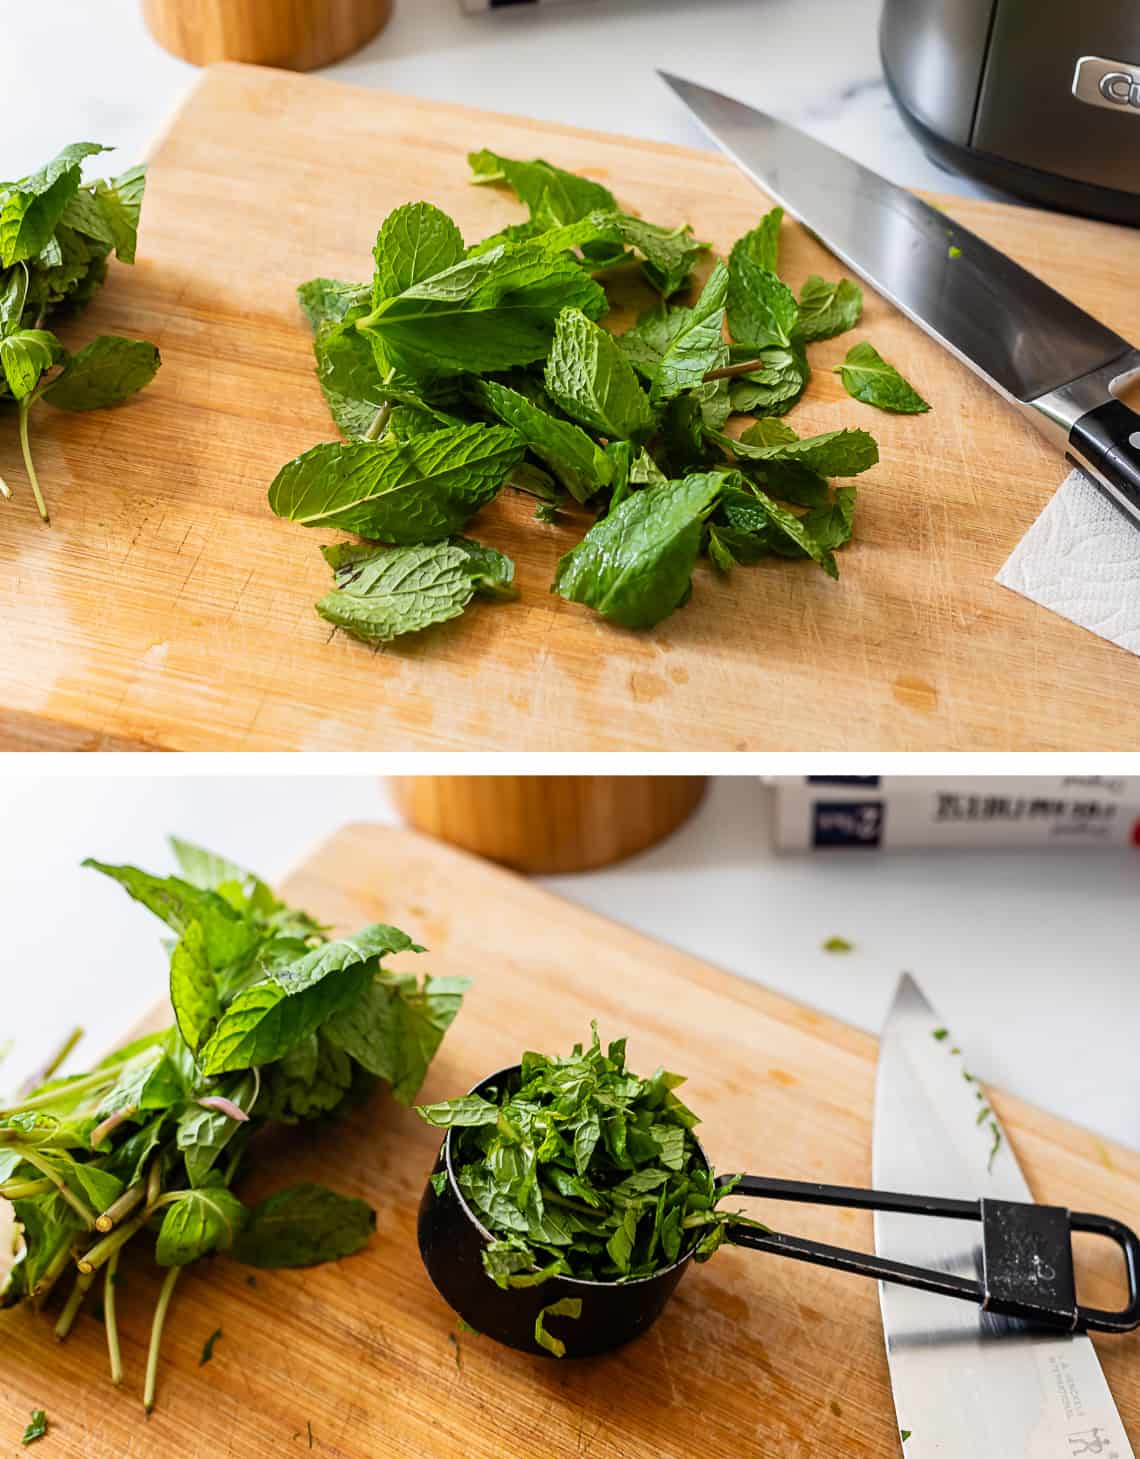 chopping and measuring fresh mint on a wooden cutting board.